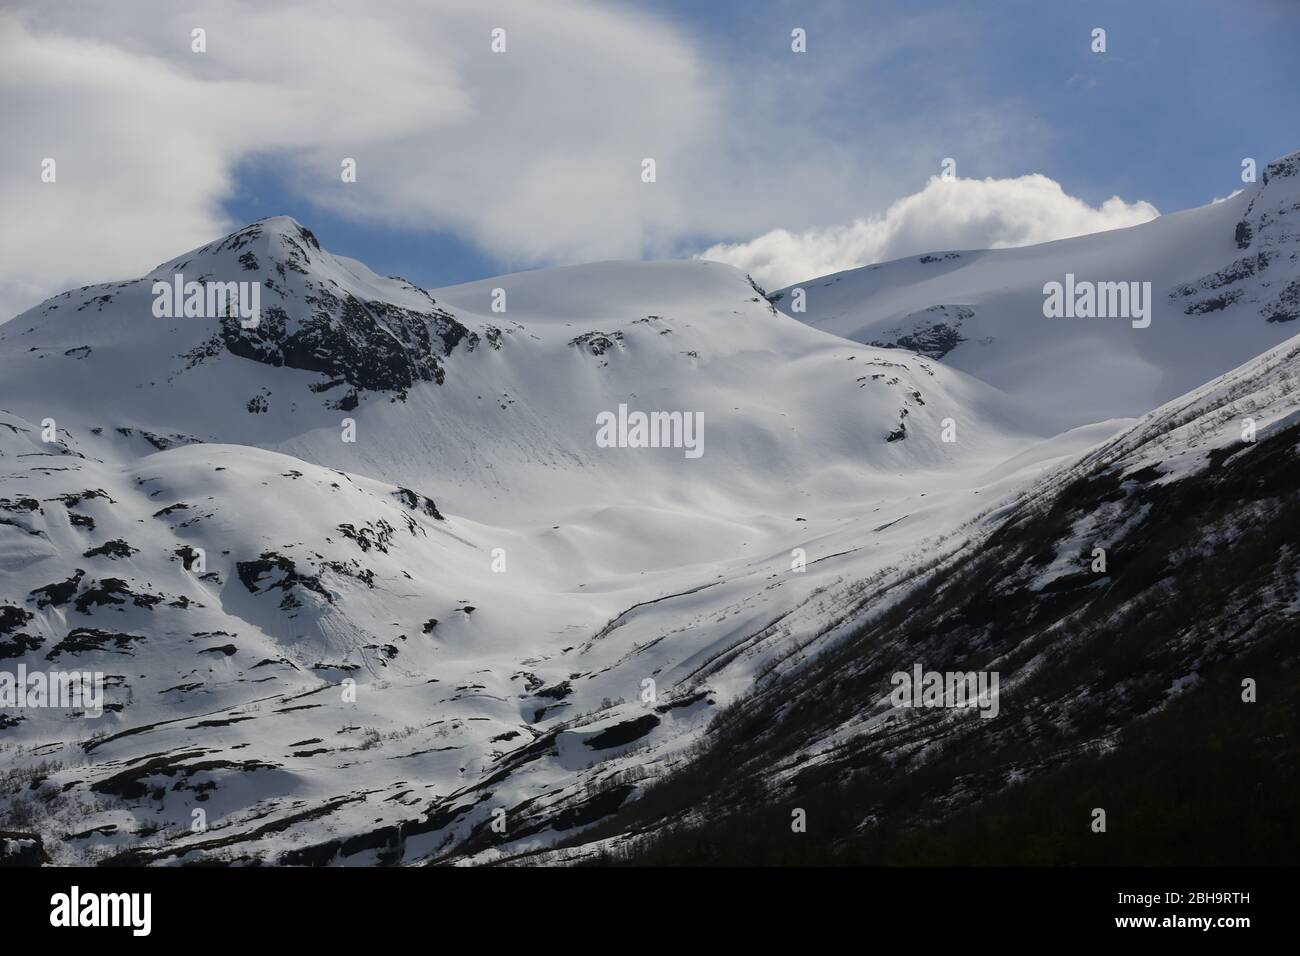 Snow-capped mountains Norway Stock Photo